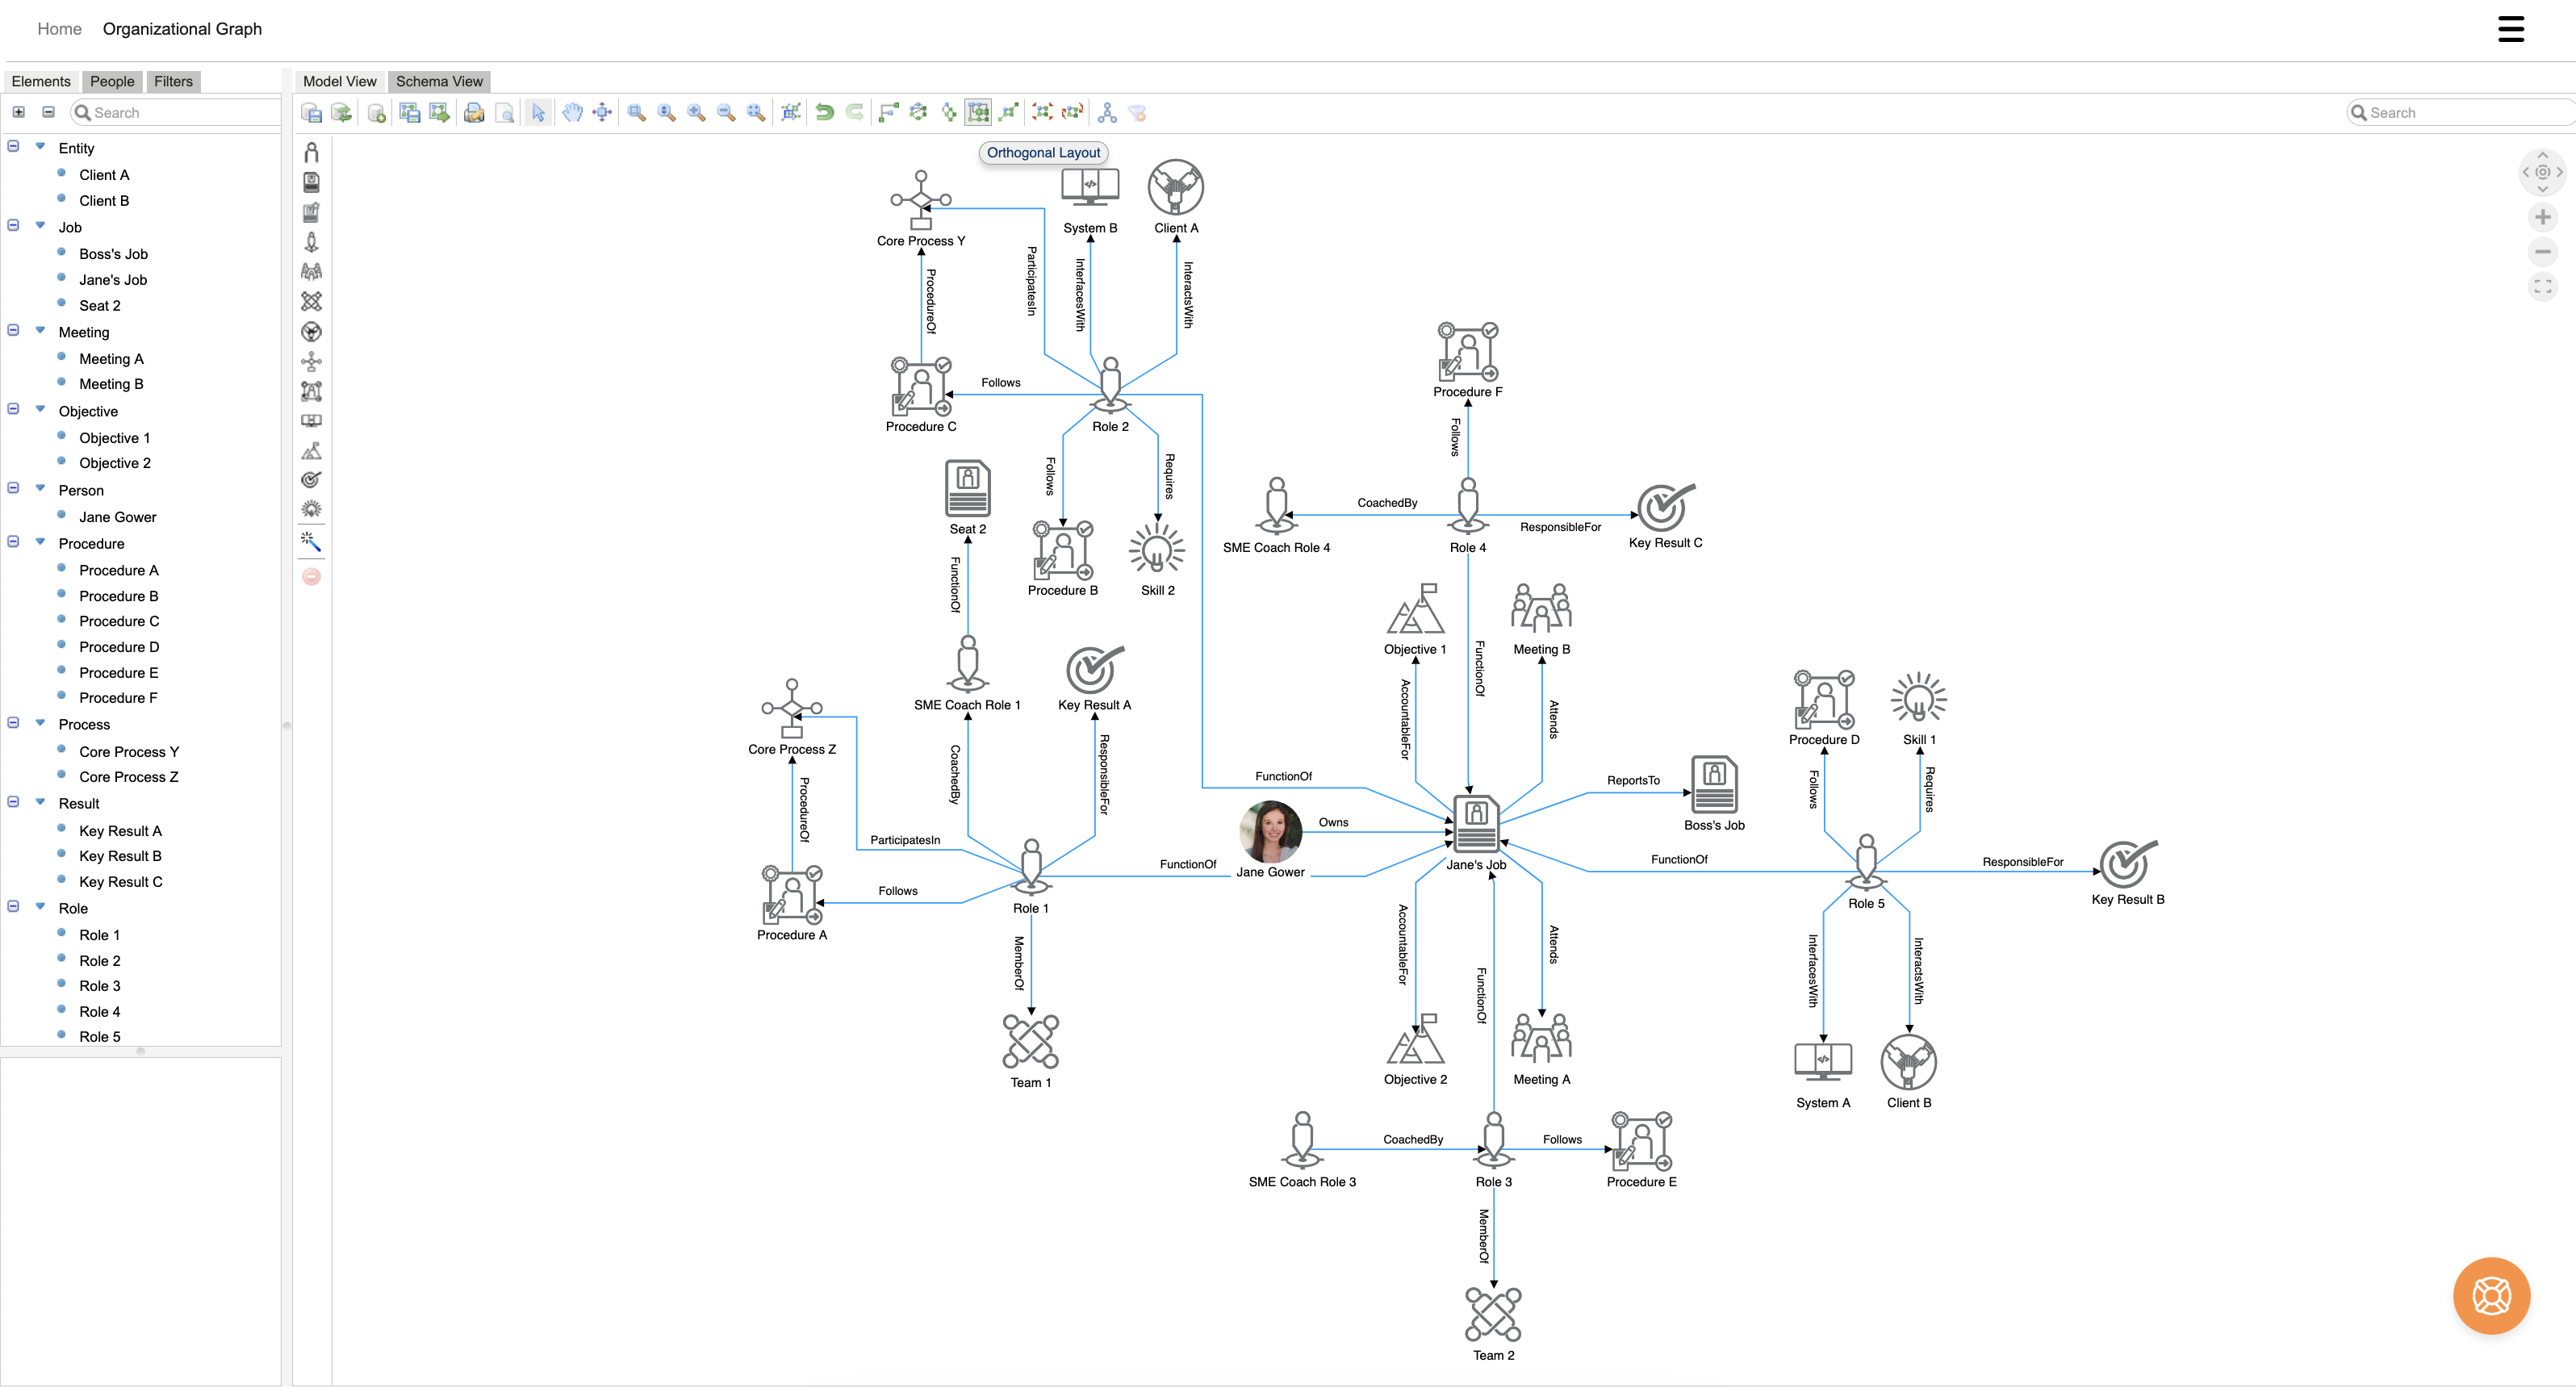 Employees can visualize how they connect to the company at a fine level.